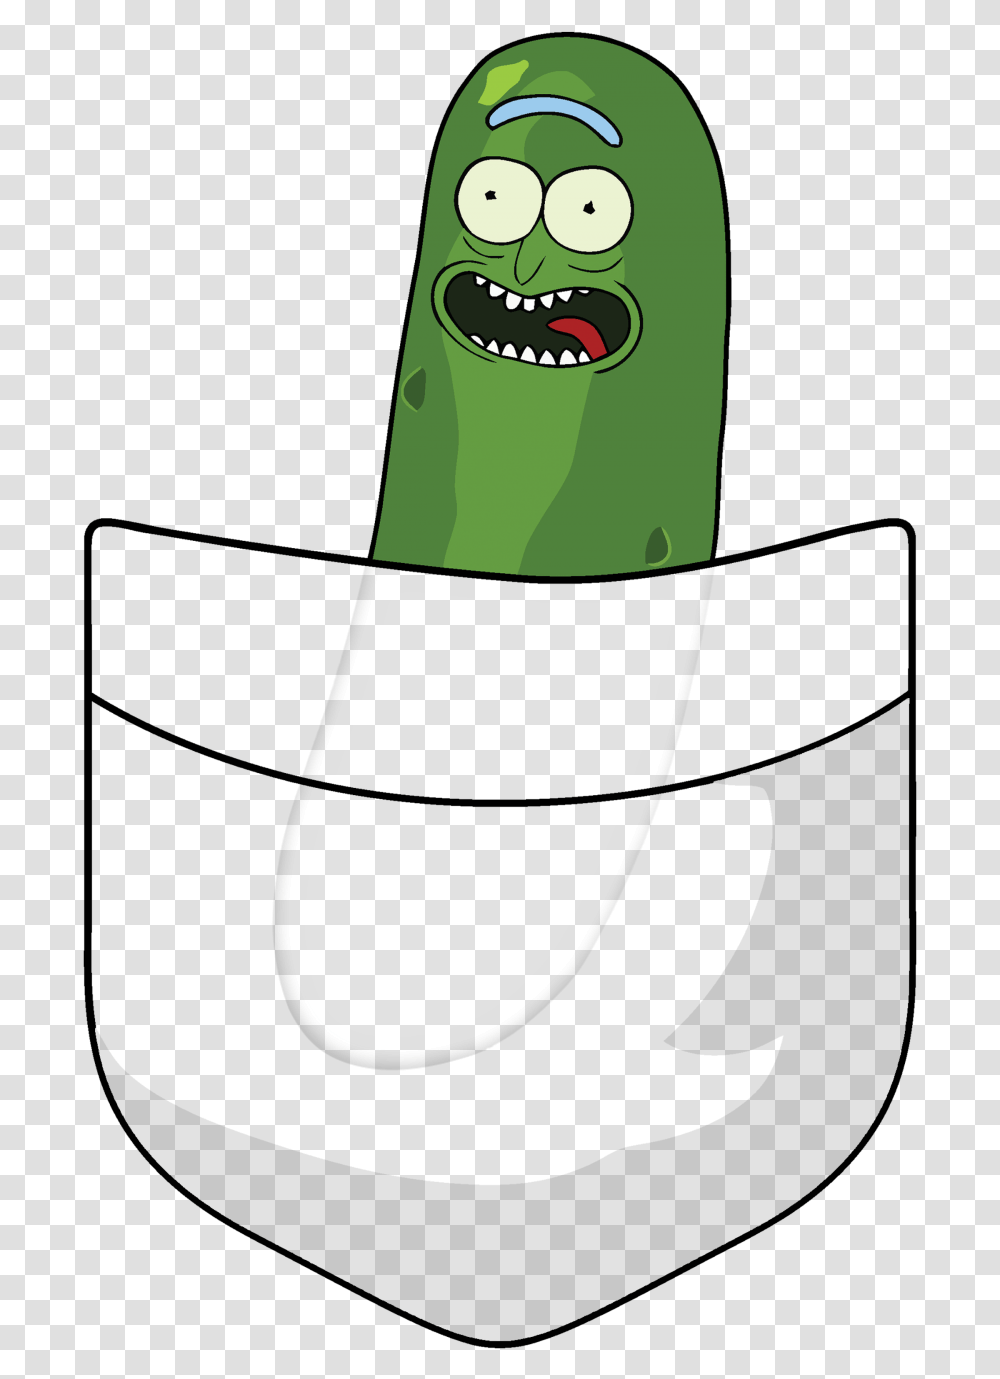 Pickle Rick In A Pocket, Plant, Food, Sweets, Confectionery Transparent Png